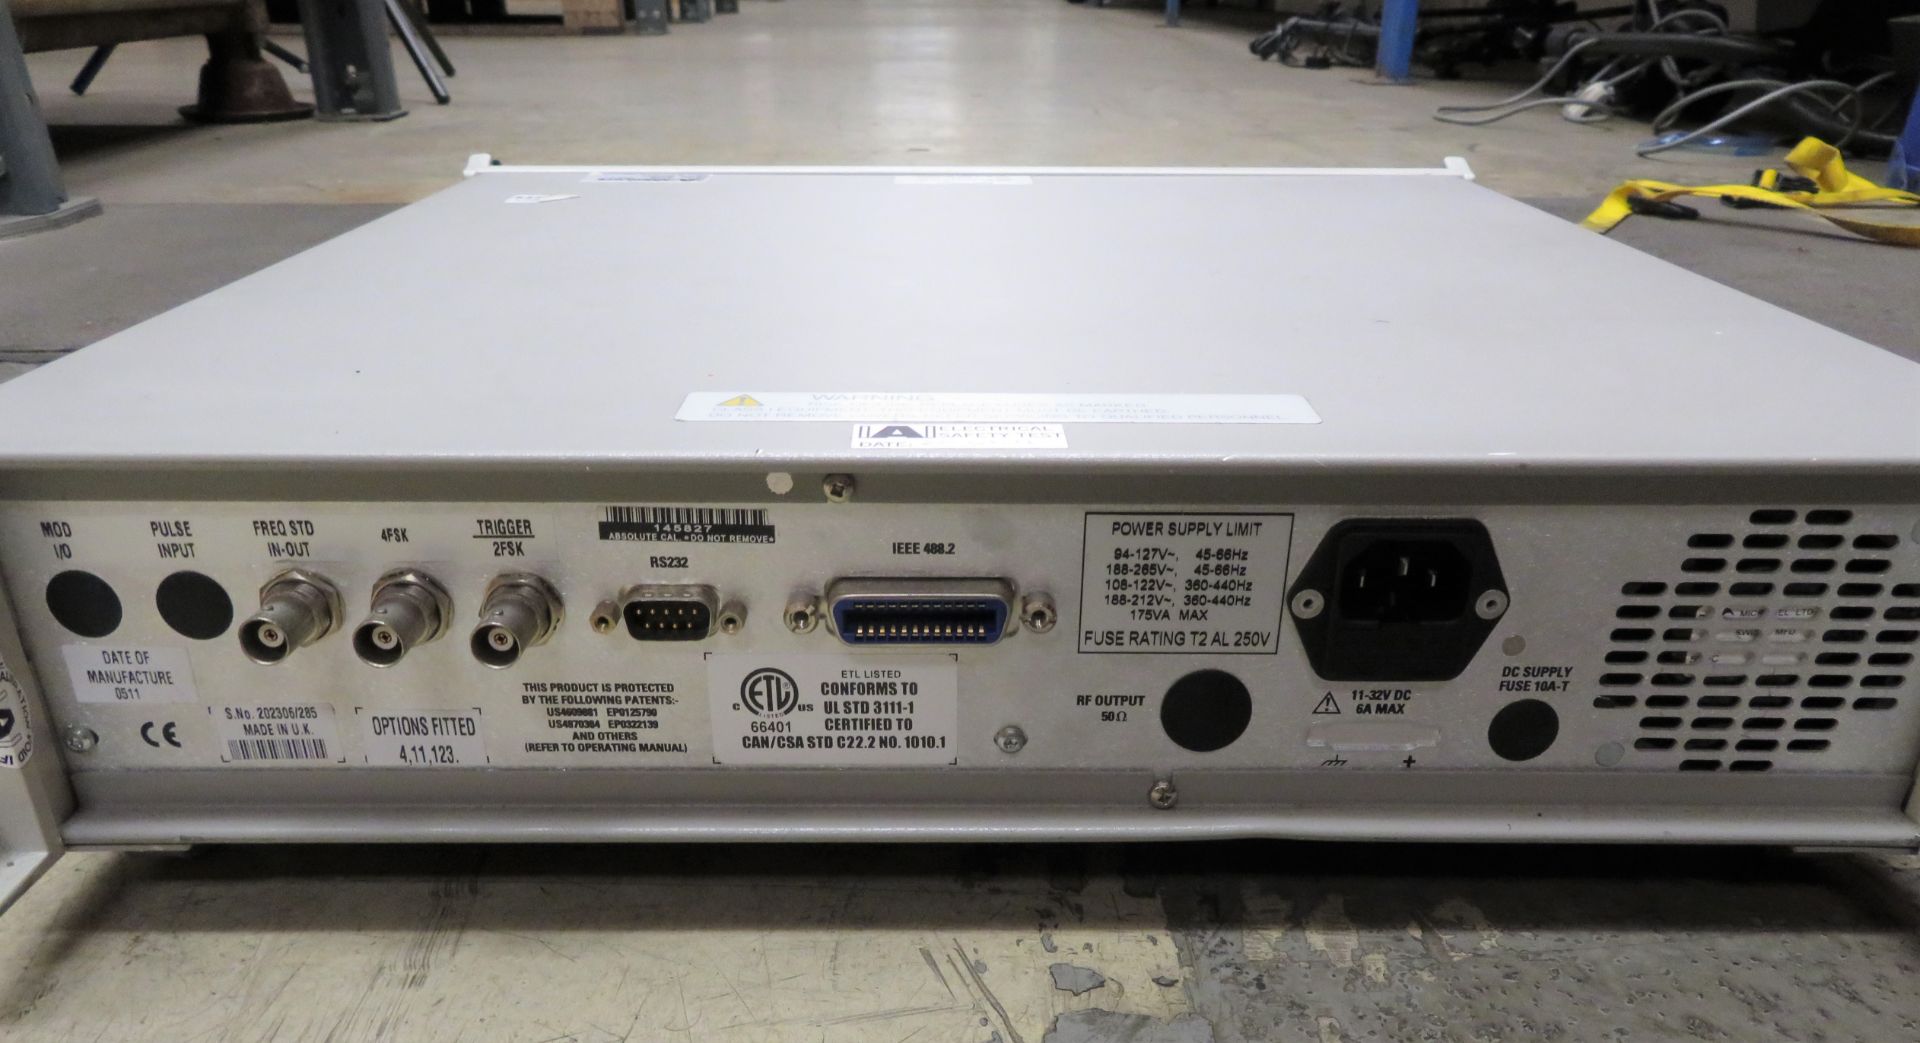 IFR 2025 9kHz - 2.51 GHz Signal Generator. - Image 5 of 5